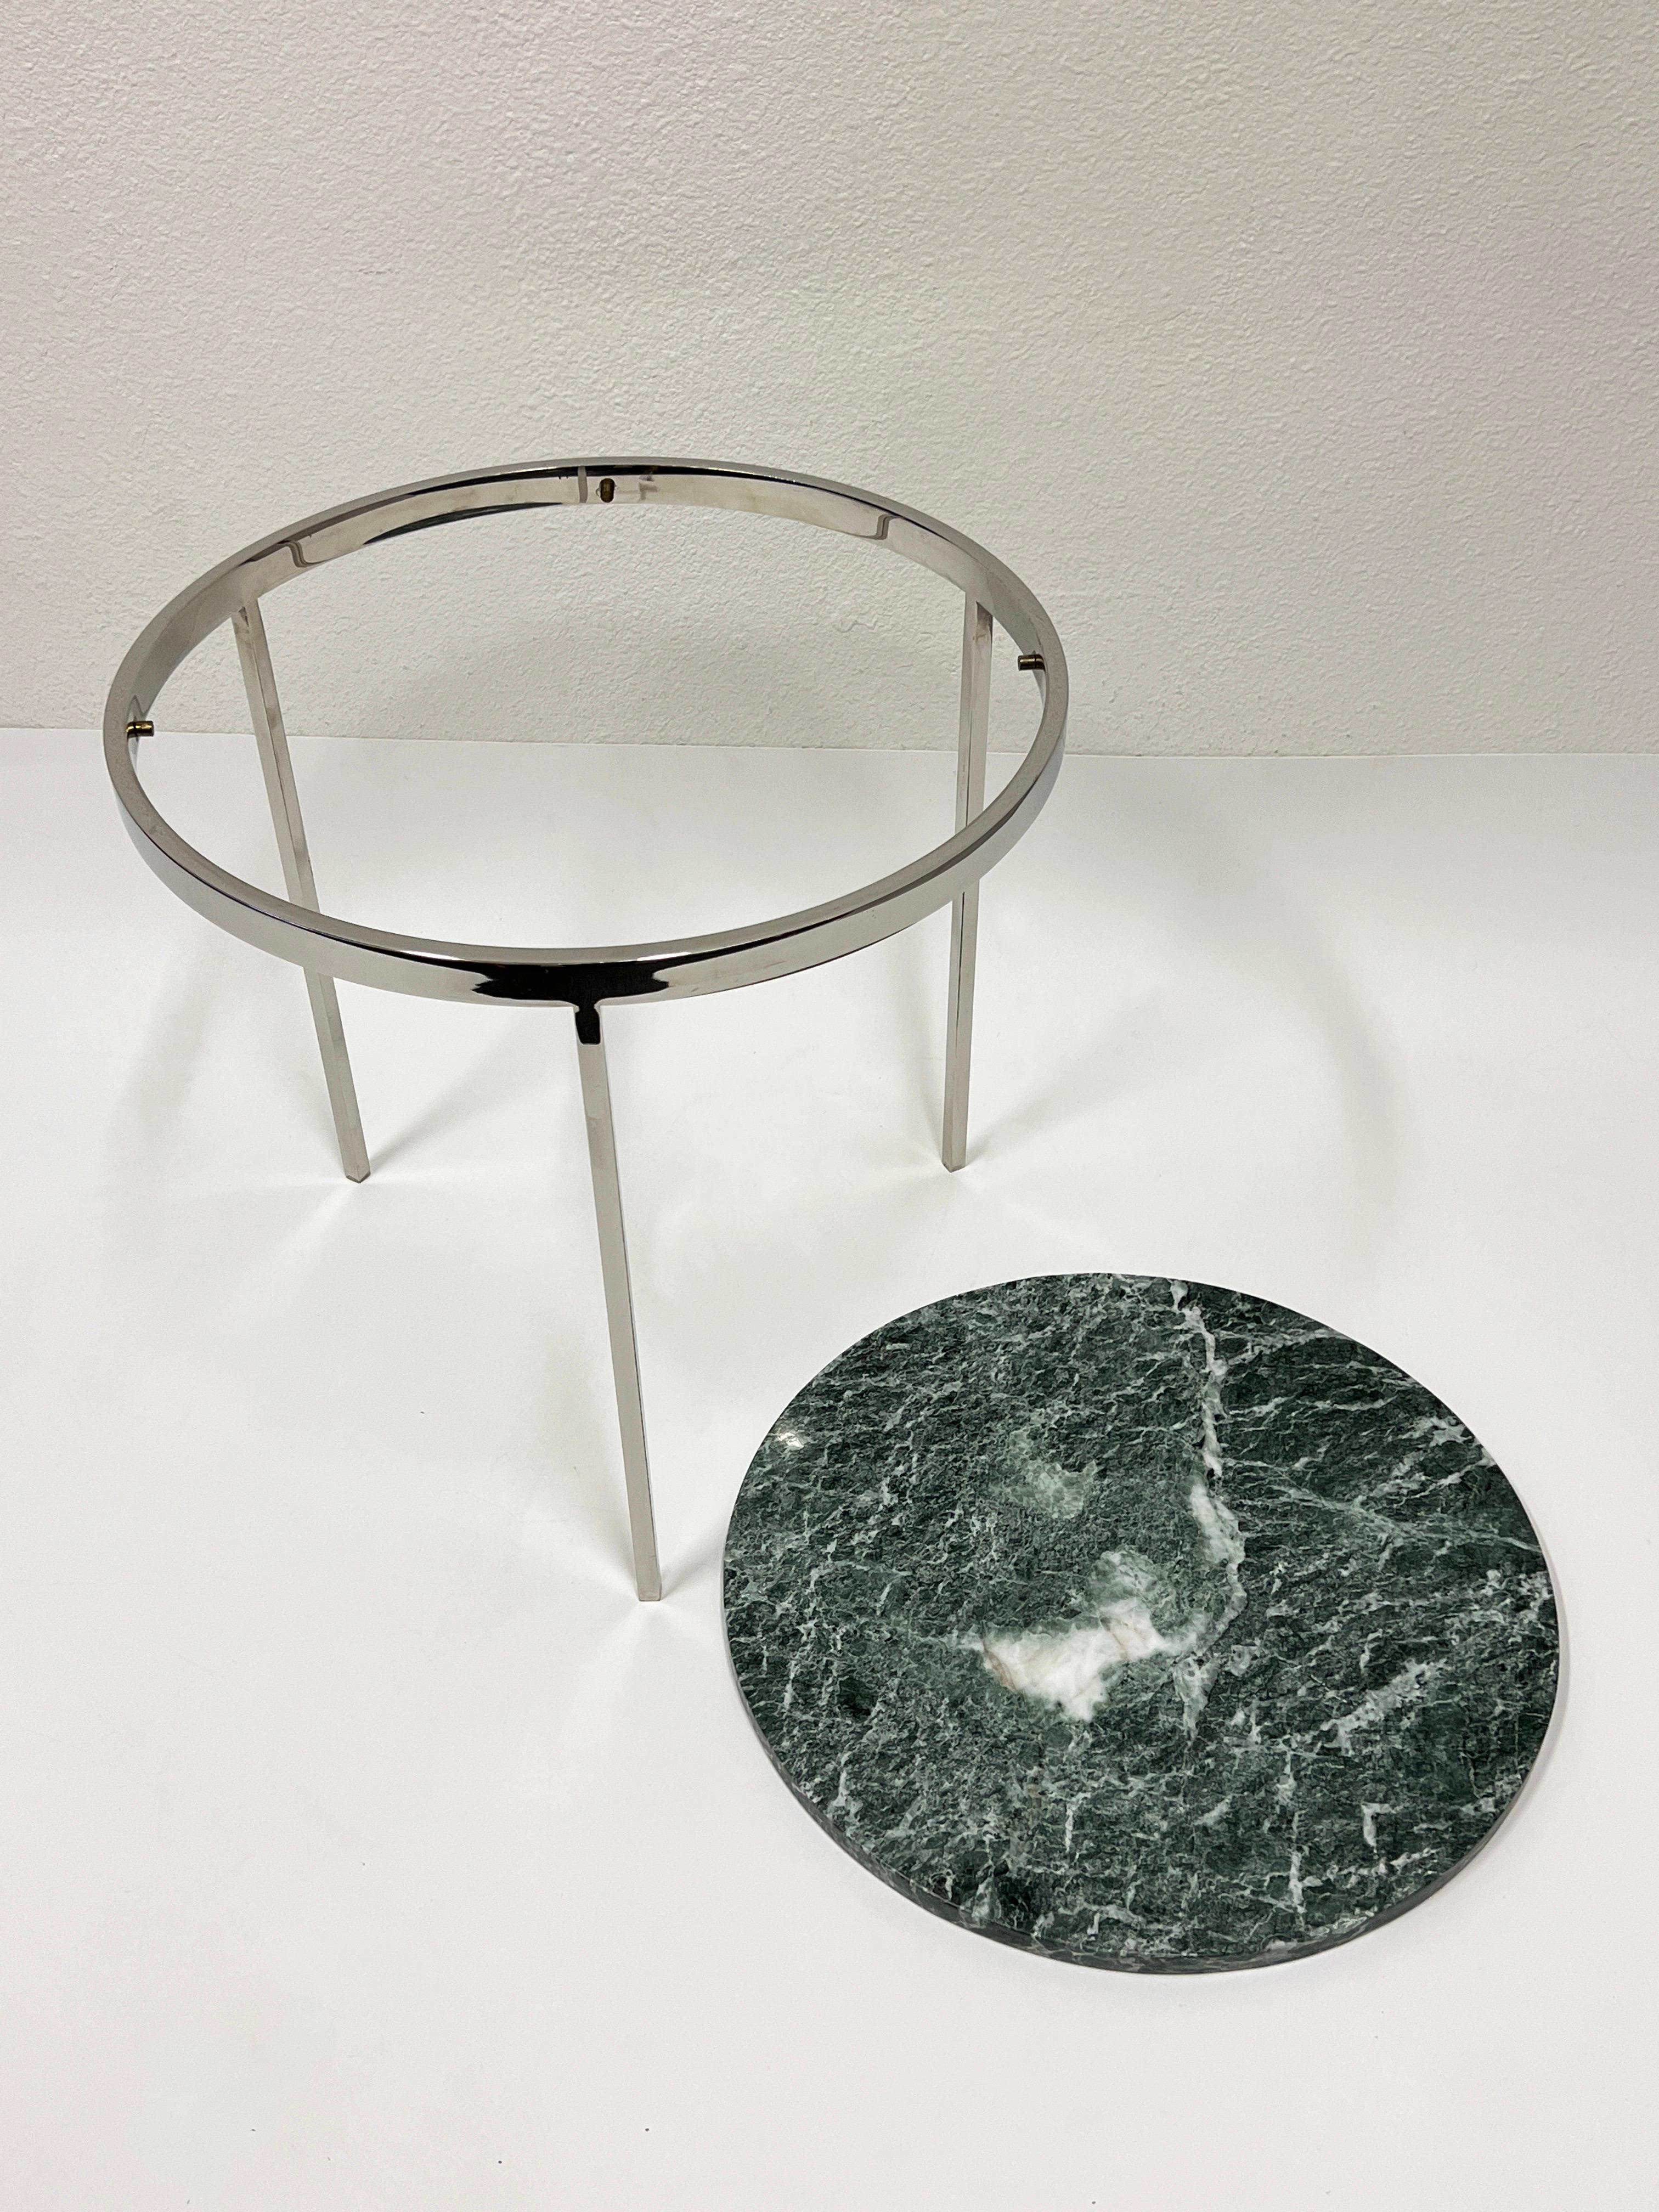 Green Marble and Polished Stainless Steel Round Tripod Side Table by Brueton  In Good Condition For Sale In Palm Springs, CA